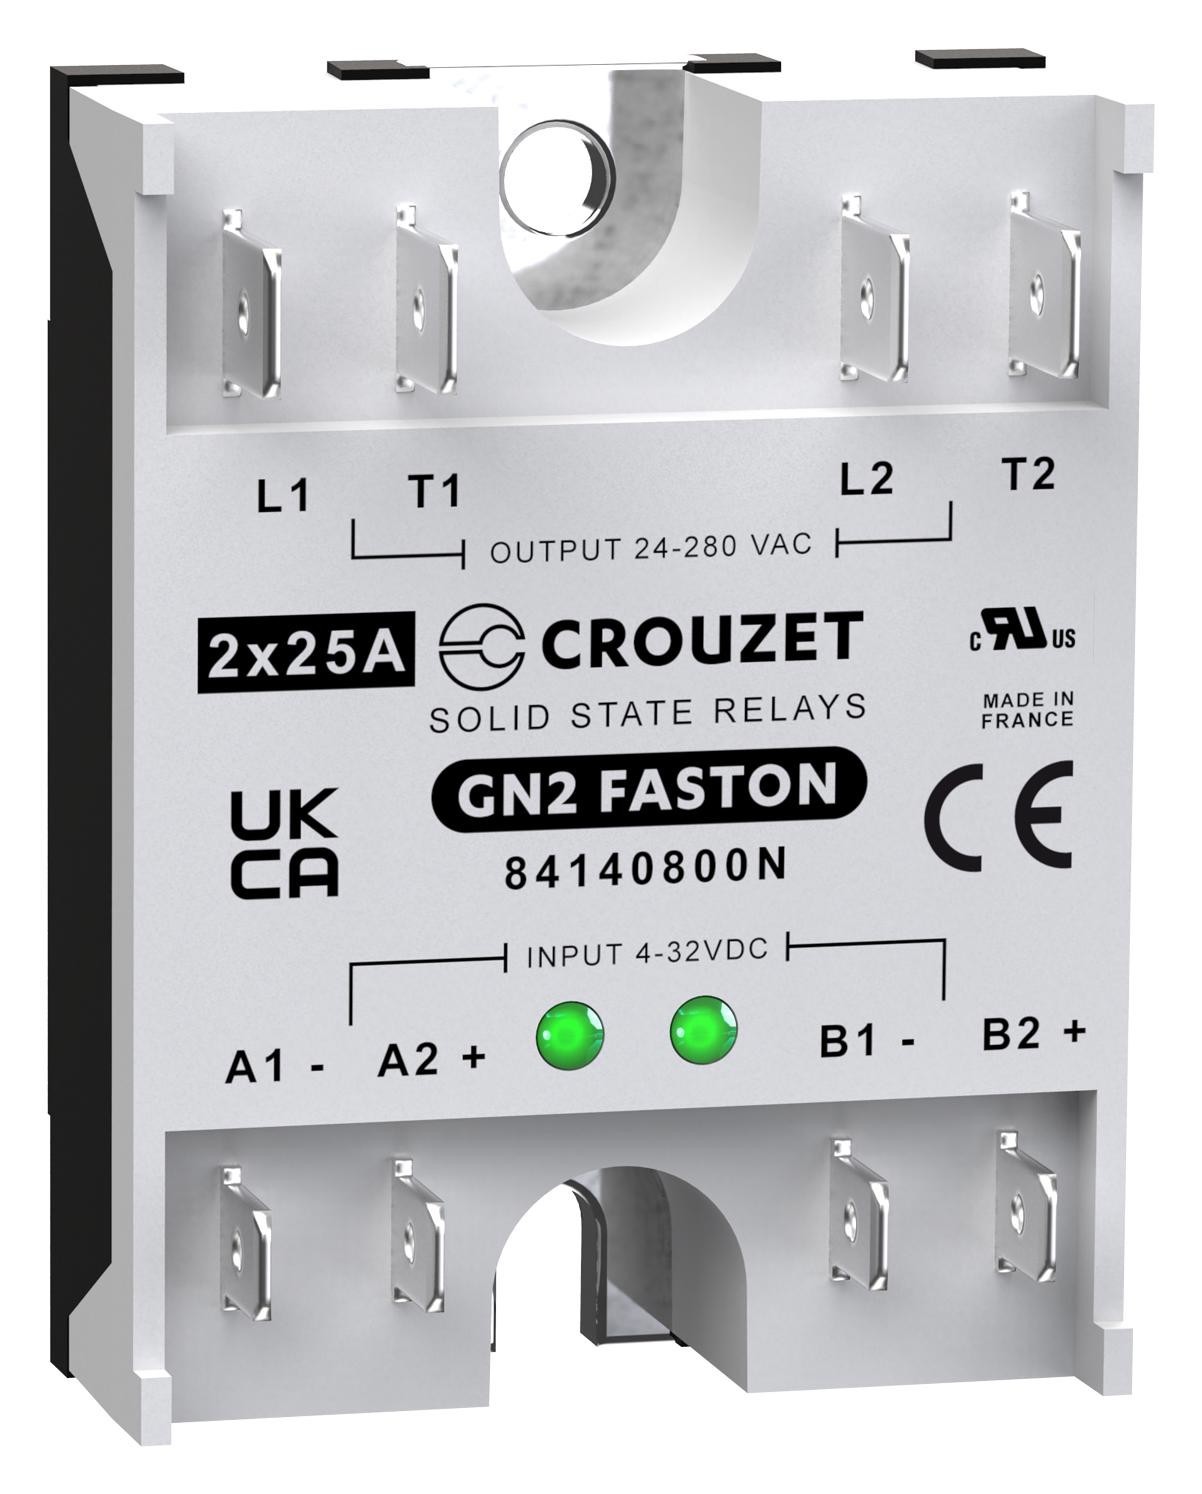 Crouzet 84140800N Solid State Relay, 25A, 4-32Vdc, Panel